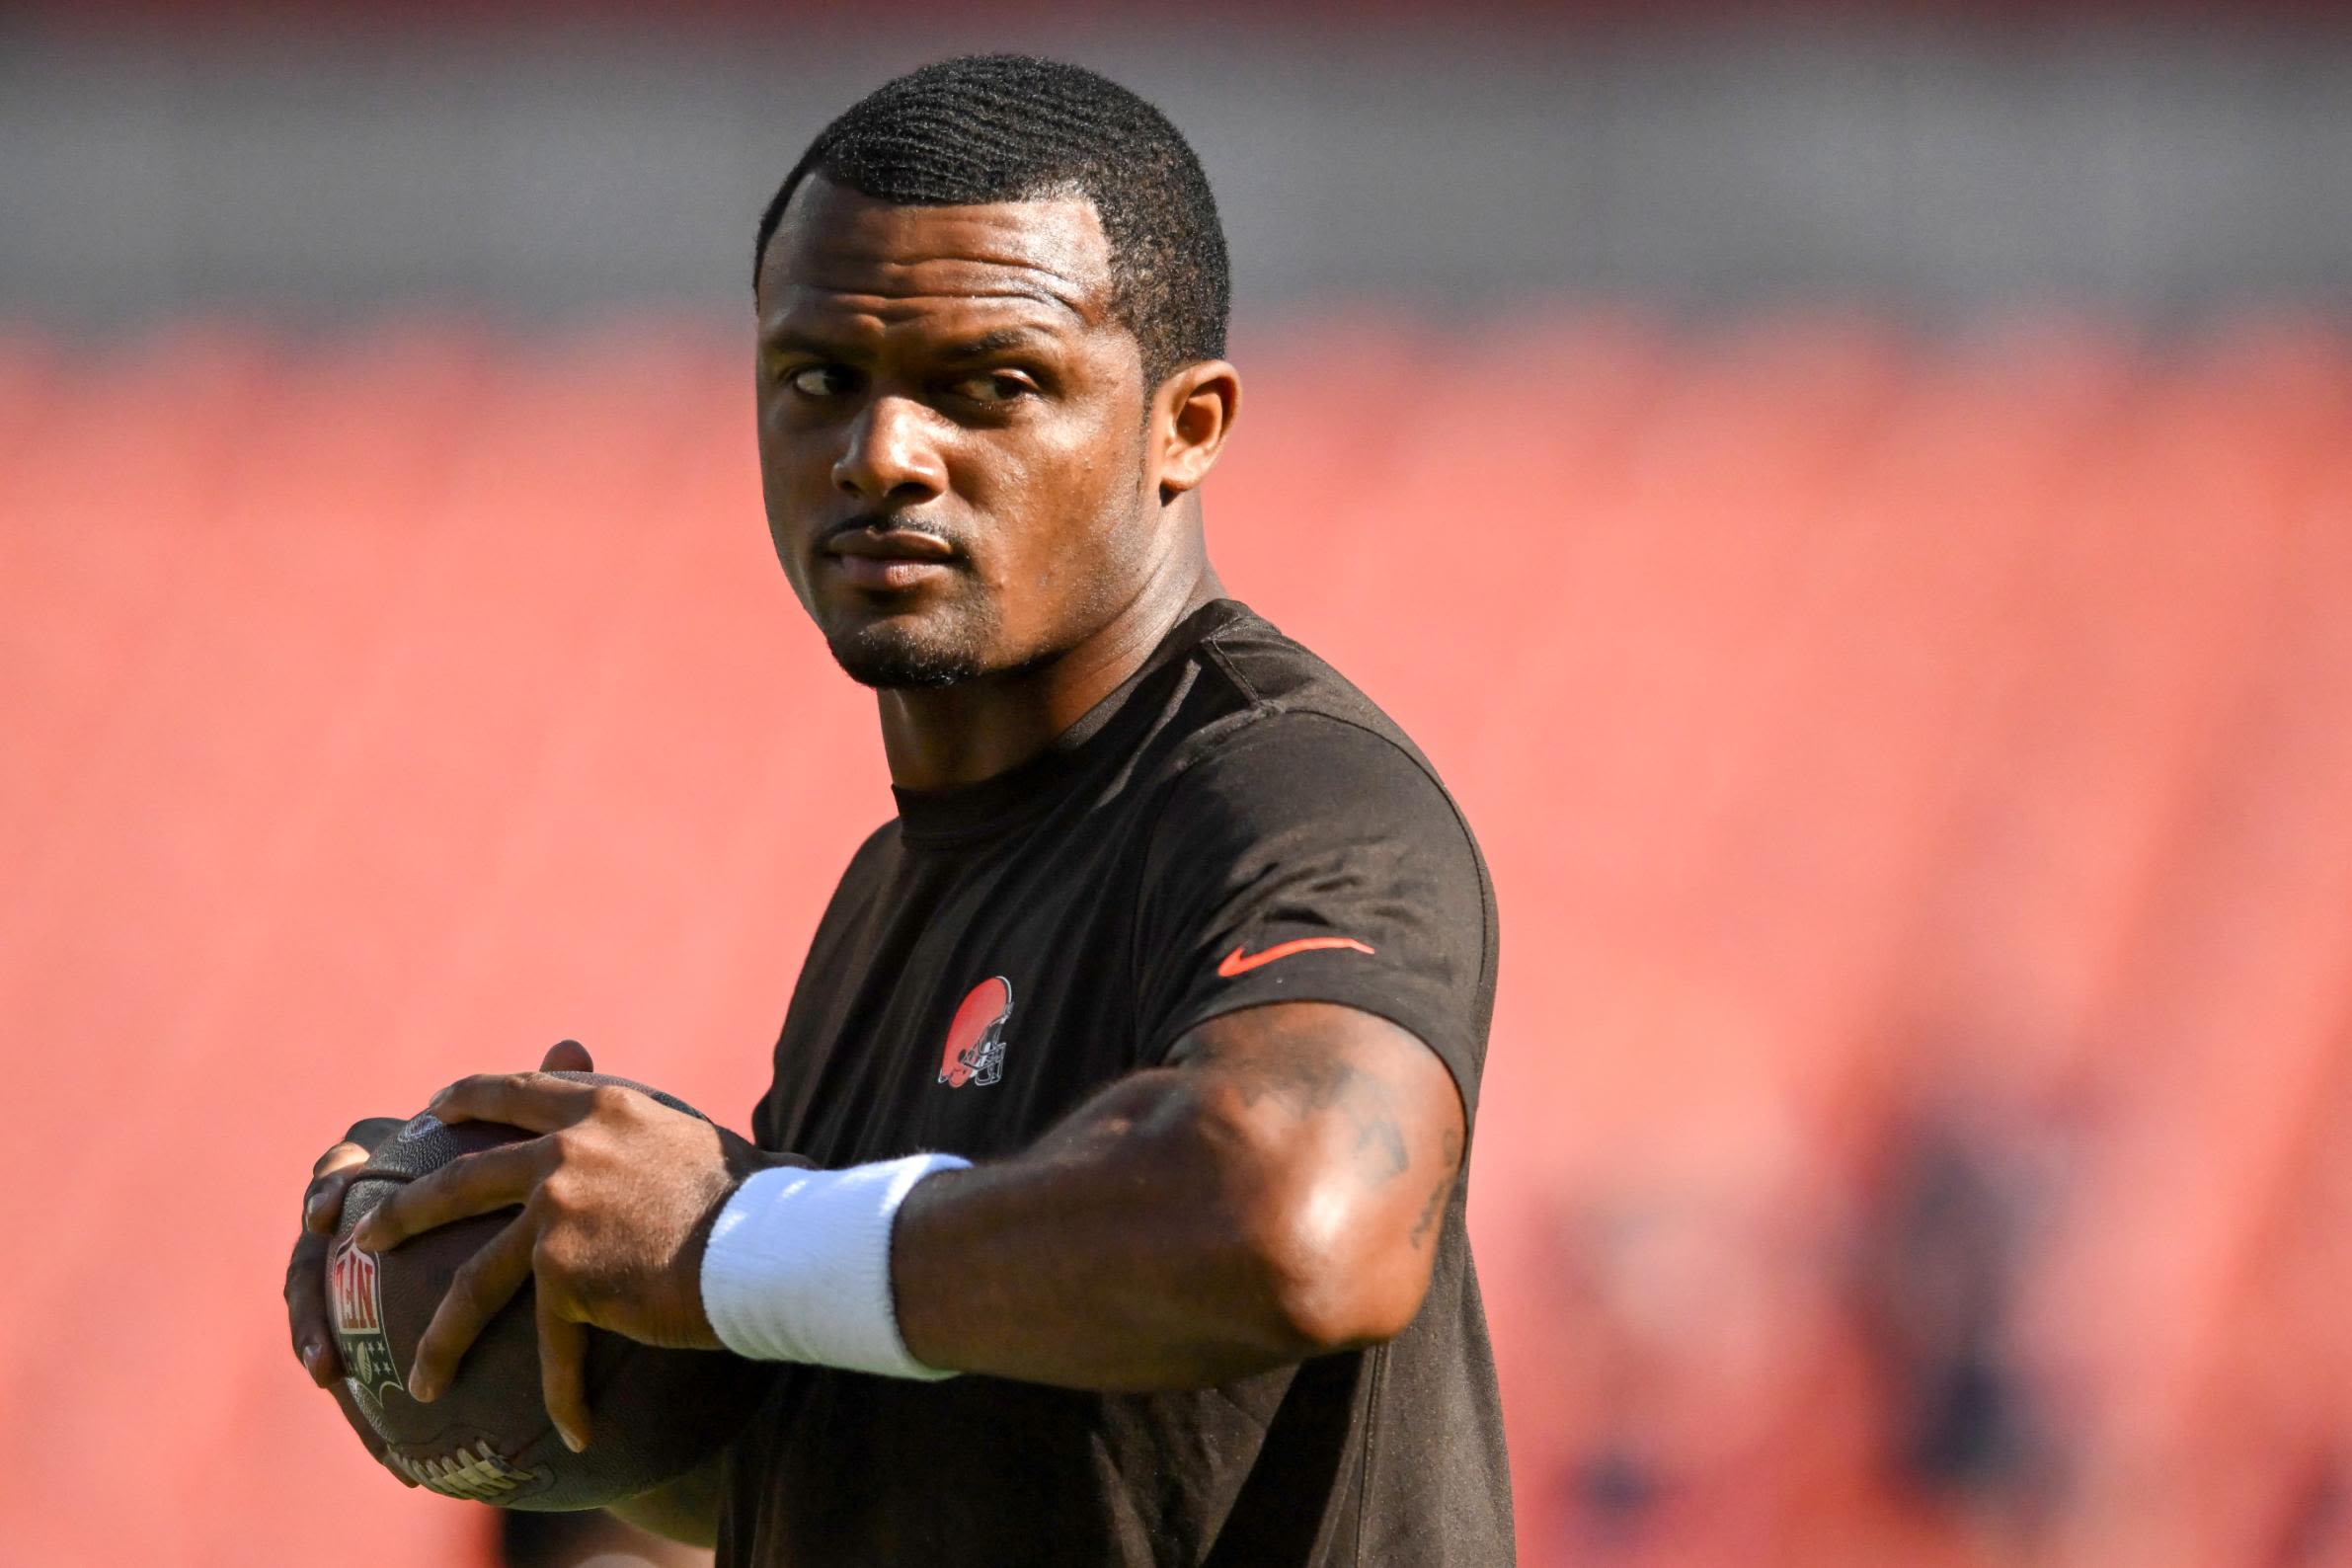 Deshaun Watson will return to play for the Cleveland Browns Sunday after  serving 11-game suspension